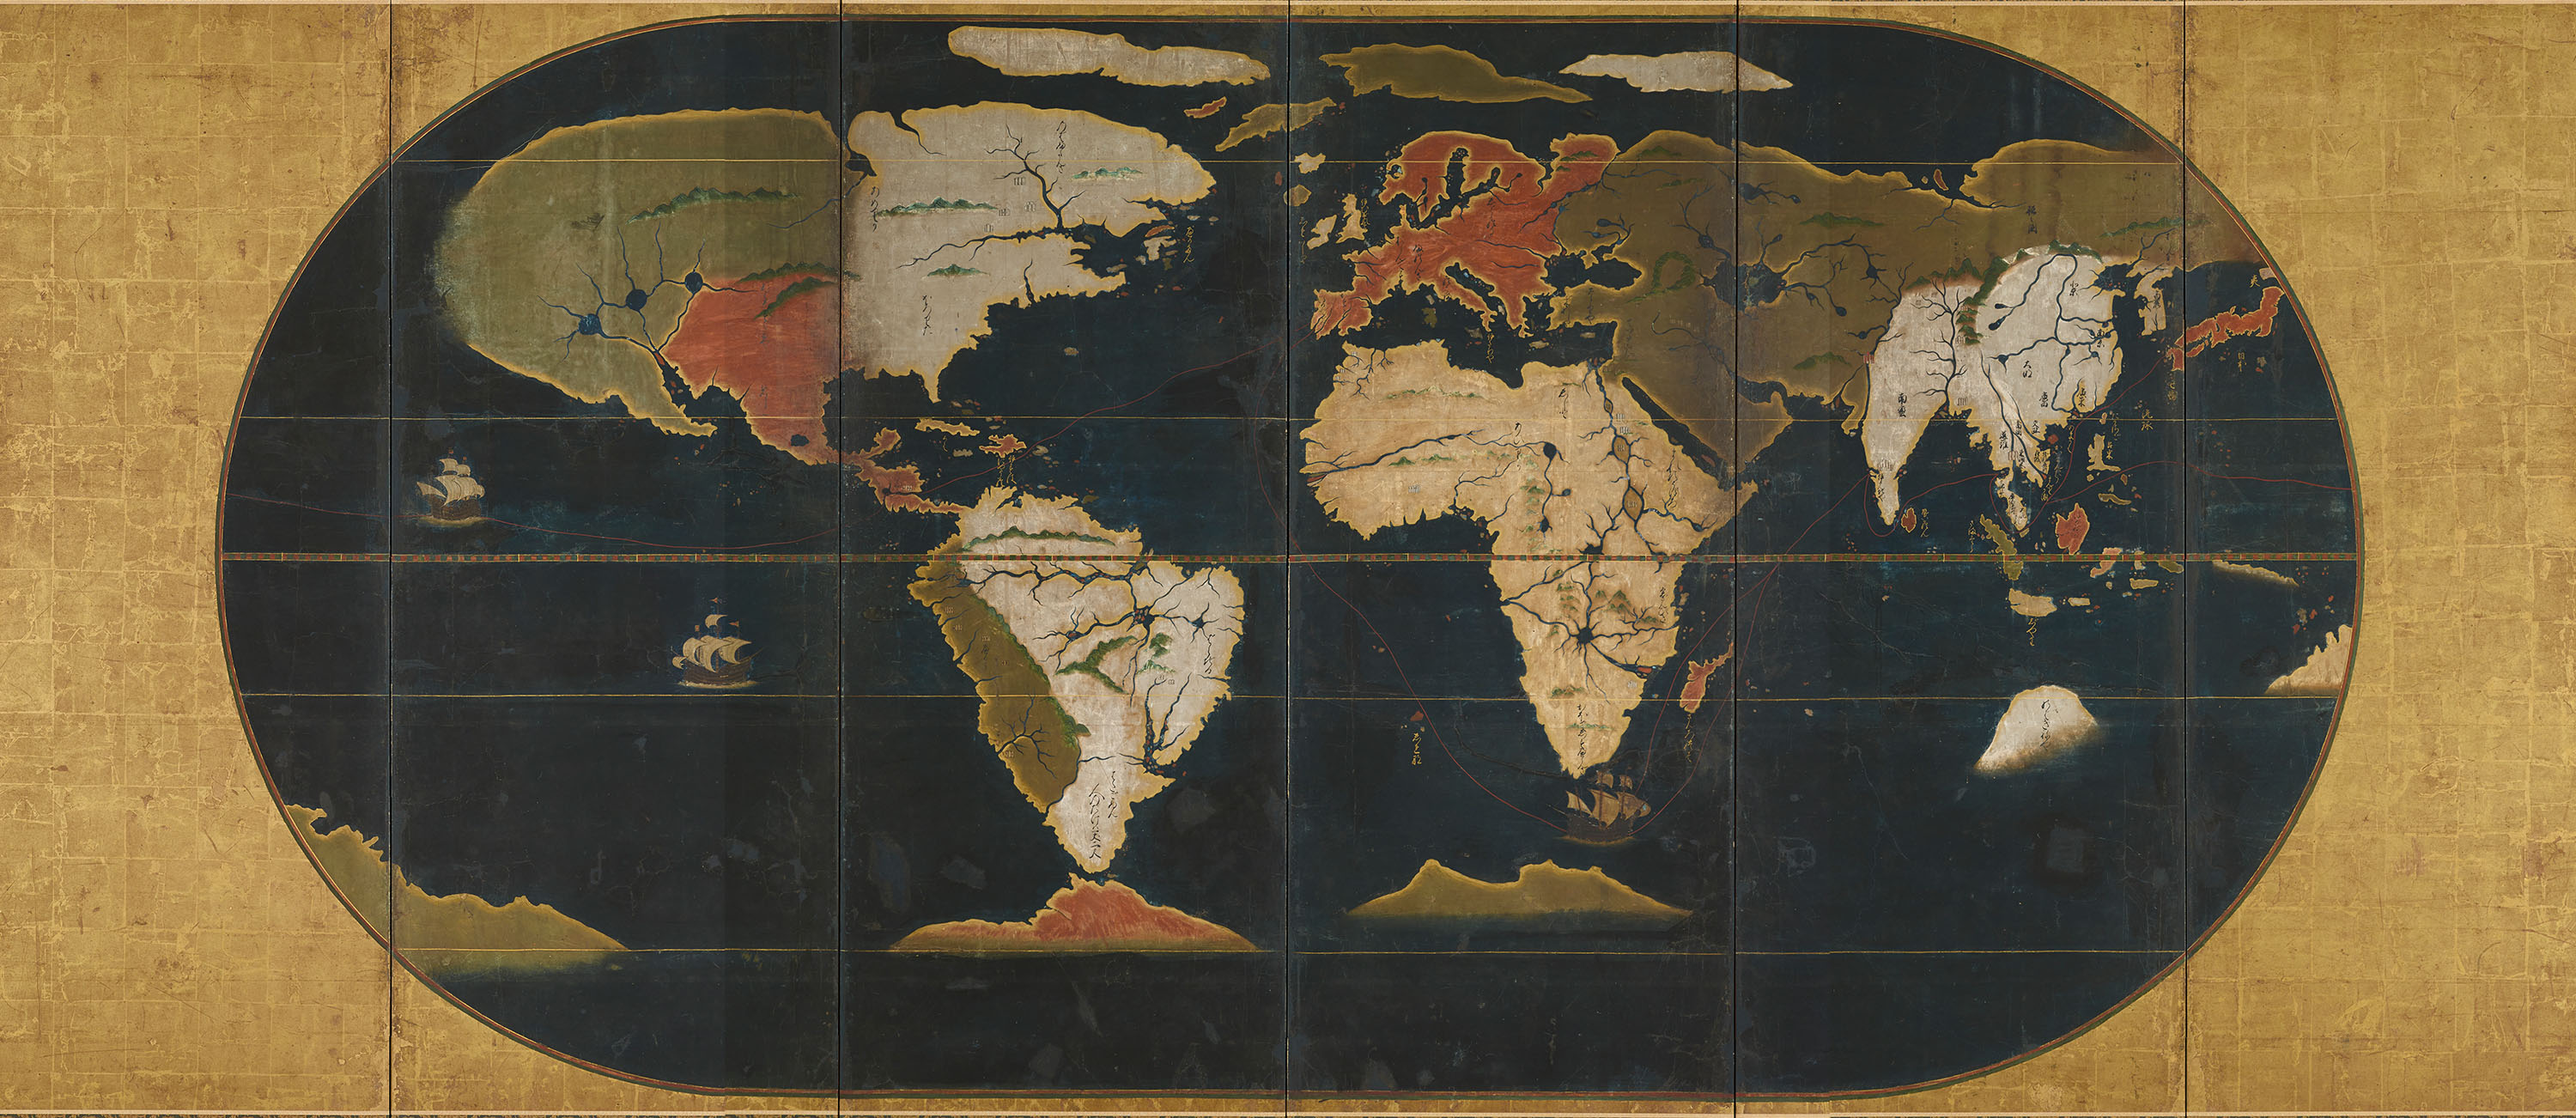 Map of the world, an Important Cultural Property (Azuchi-Momoyama Period 16th century) | PRIVATE COLLECTION